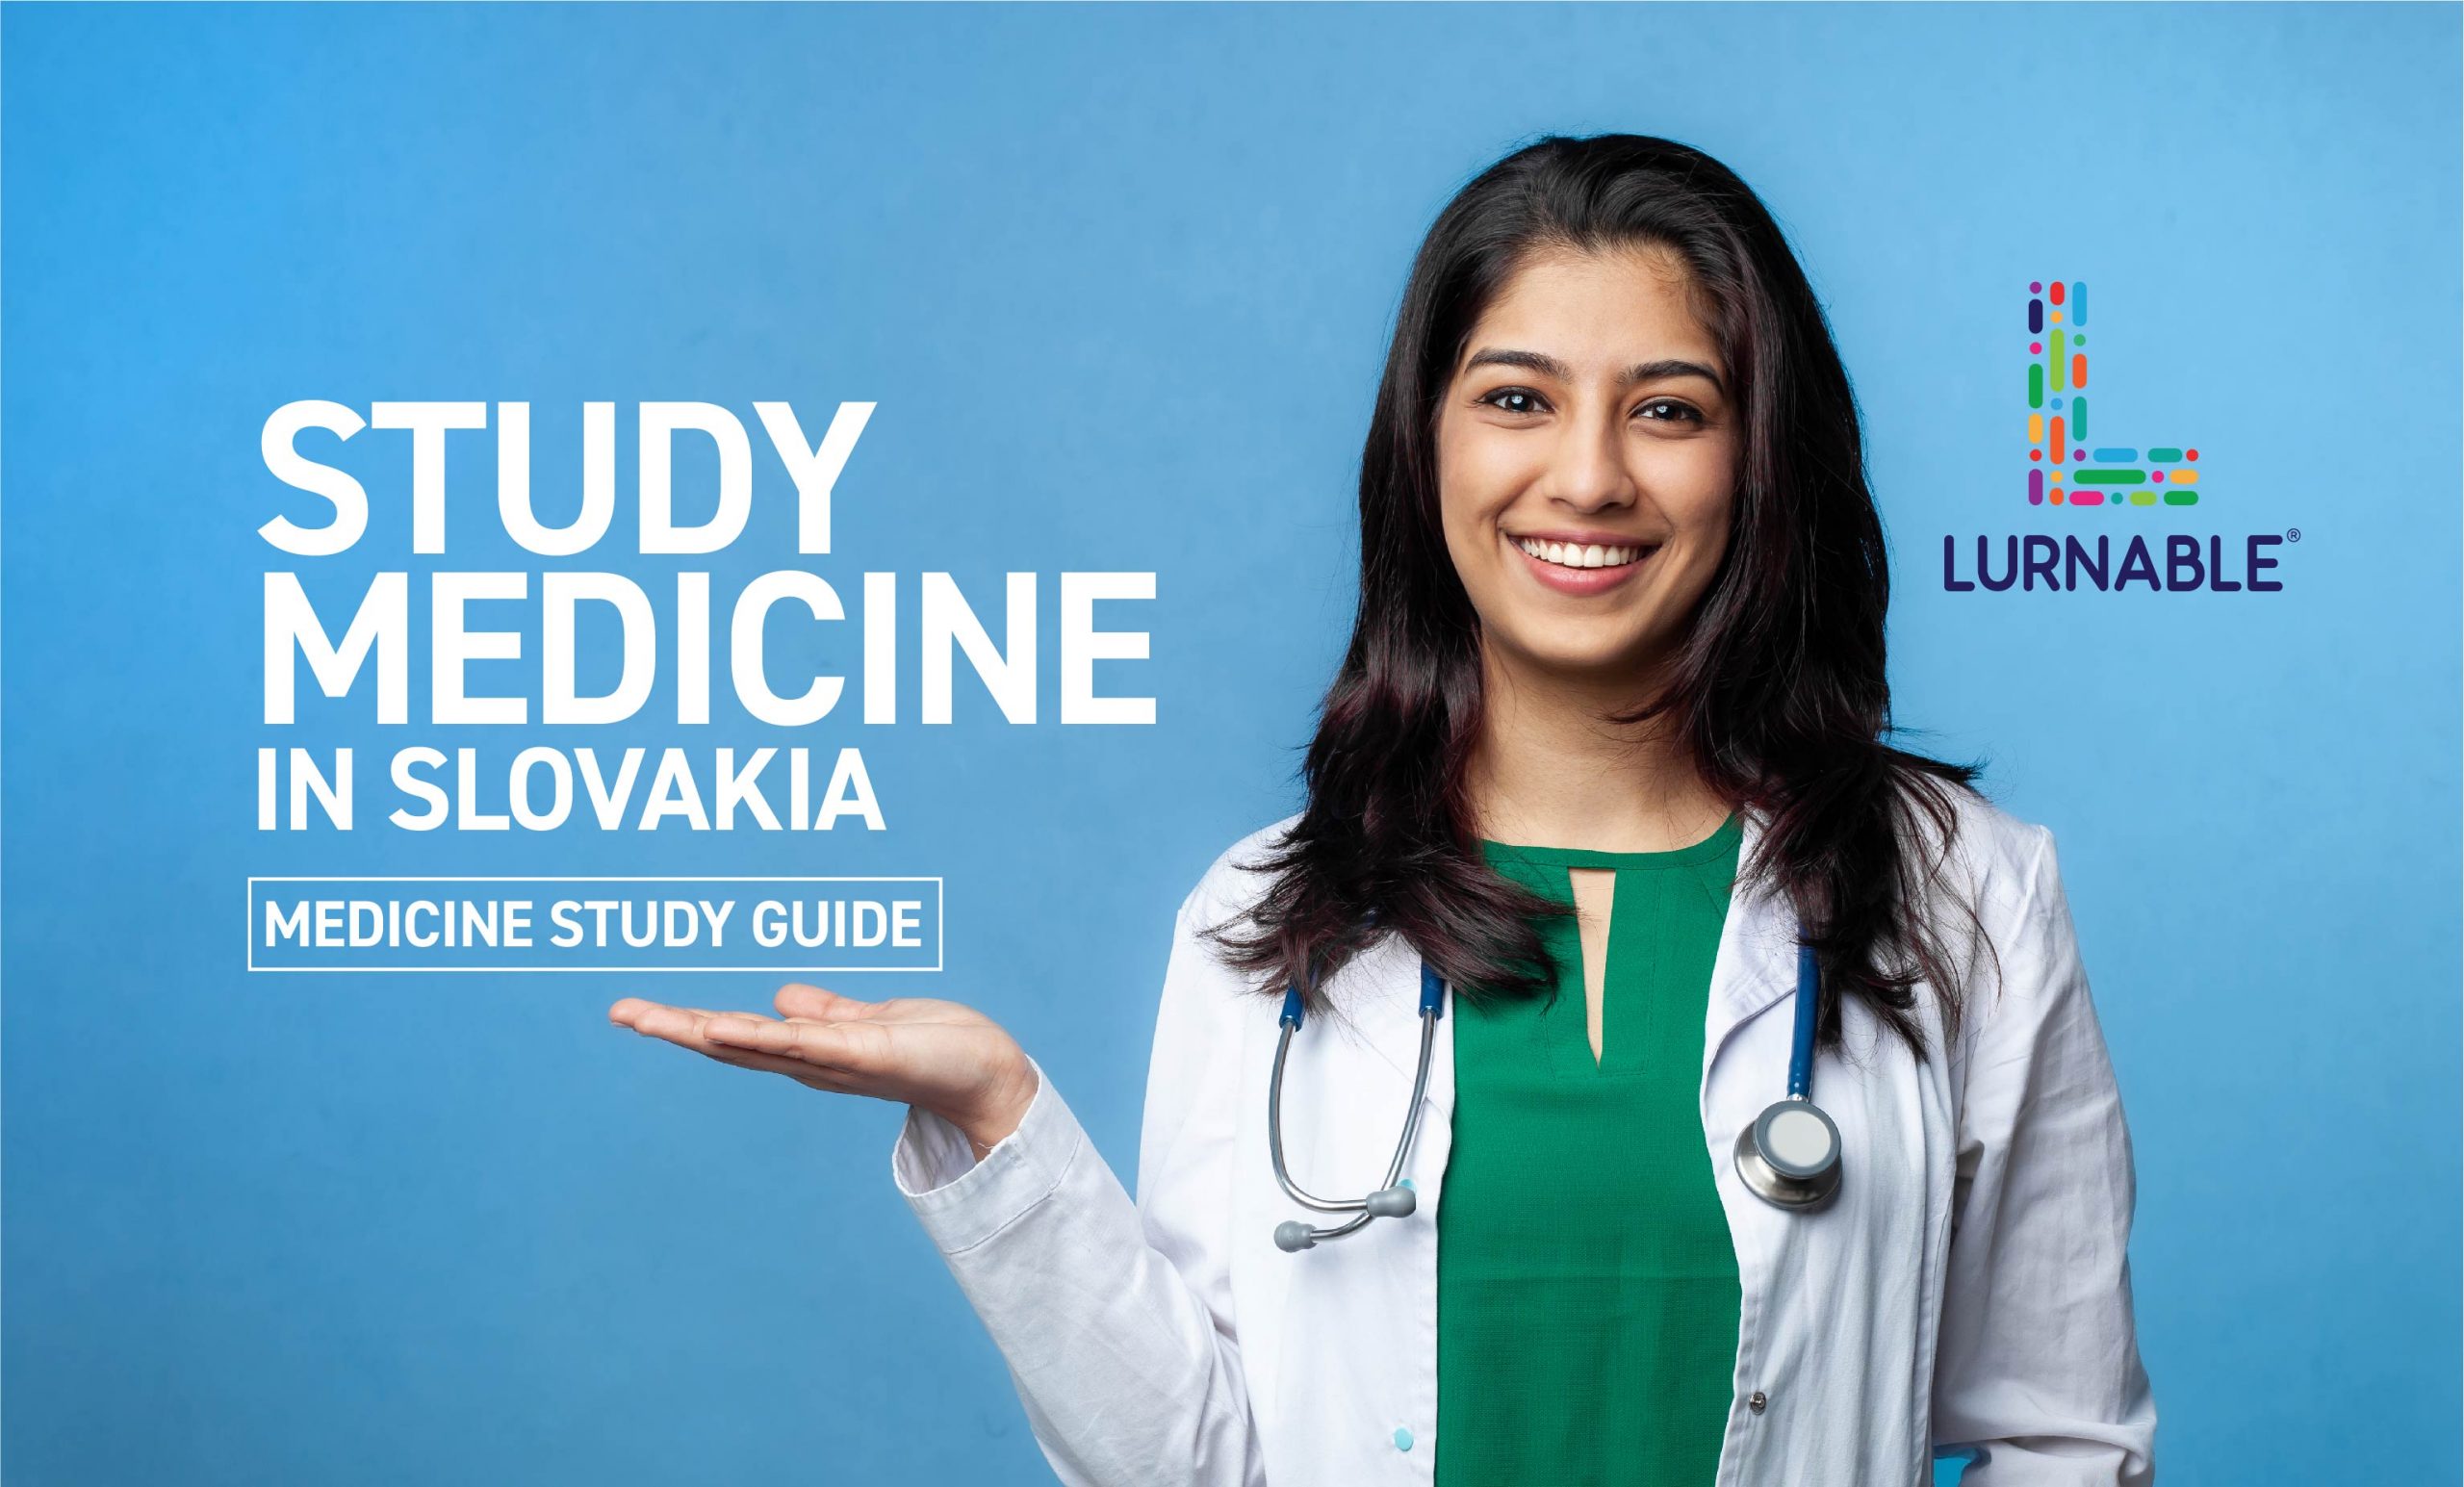 LOOKING TO STUDY MEDICINE IN SLOVAKIA? HERE’S WHAT YOU NEED TO KNOW ...